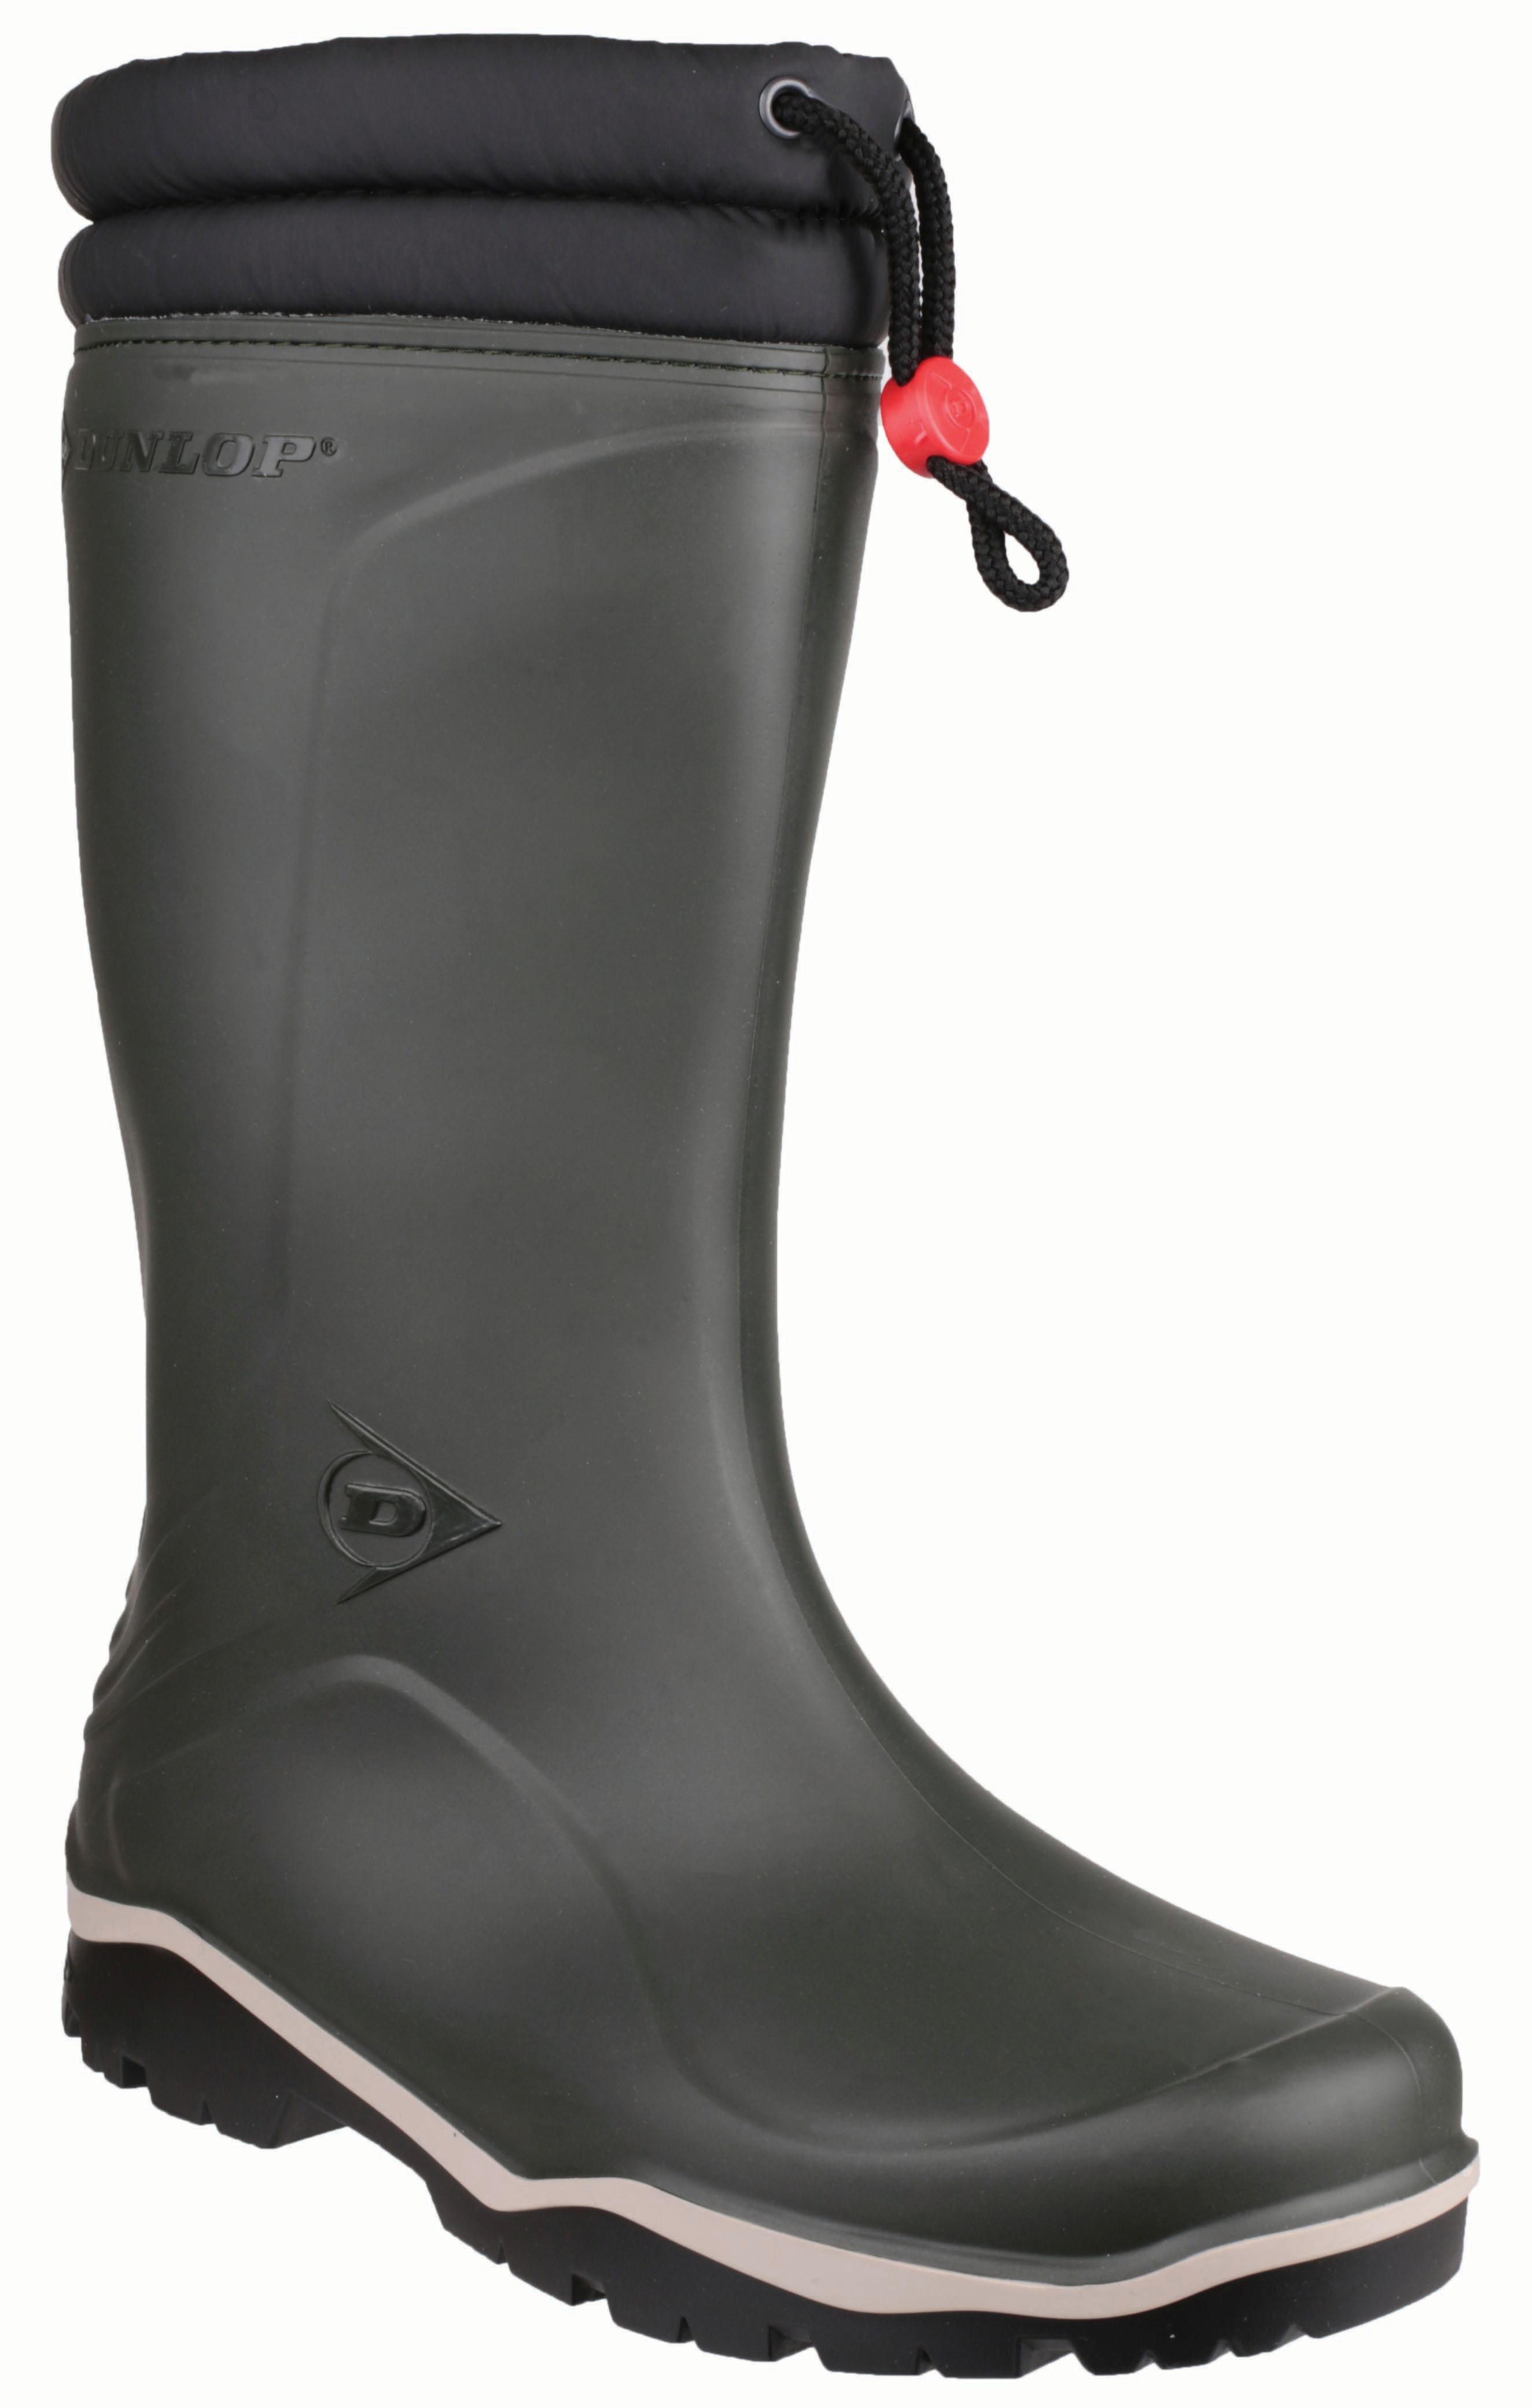 Image of Dunlop Blizzard Winter Wellington Boot - Green Size 12